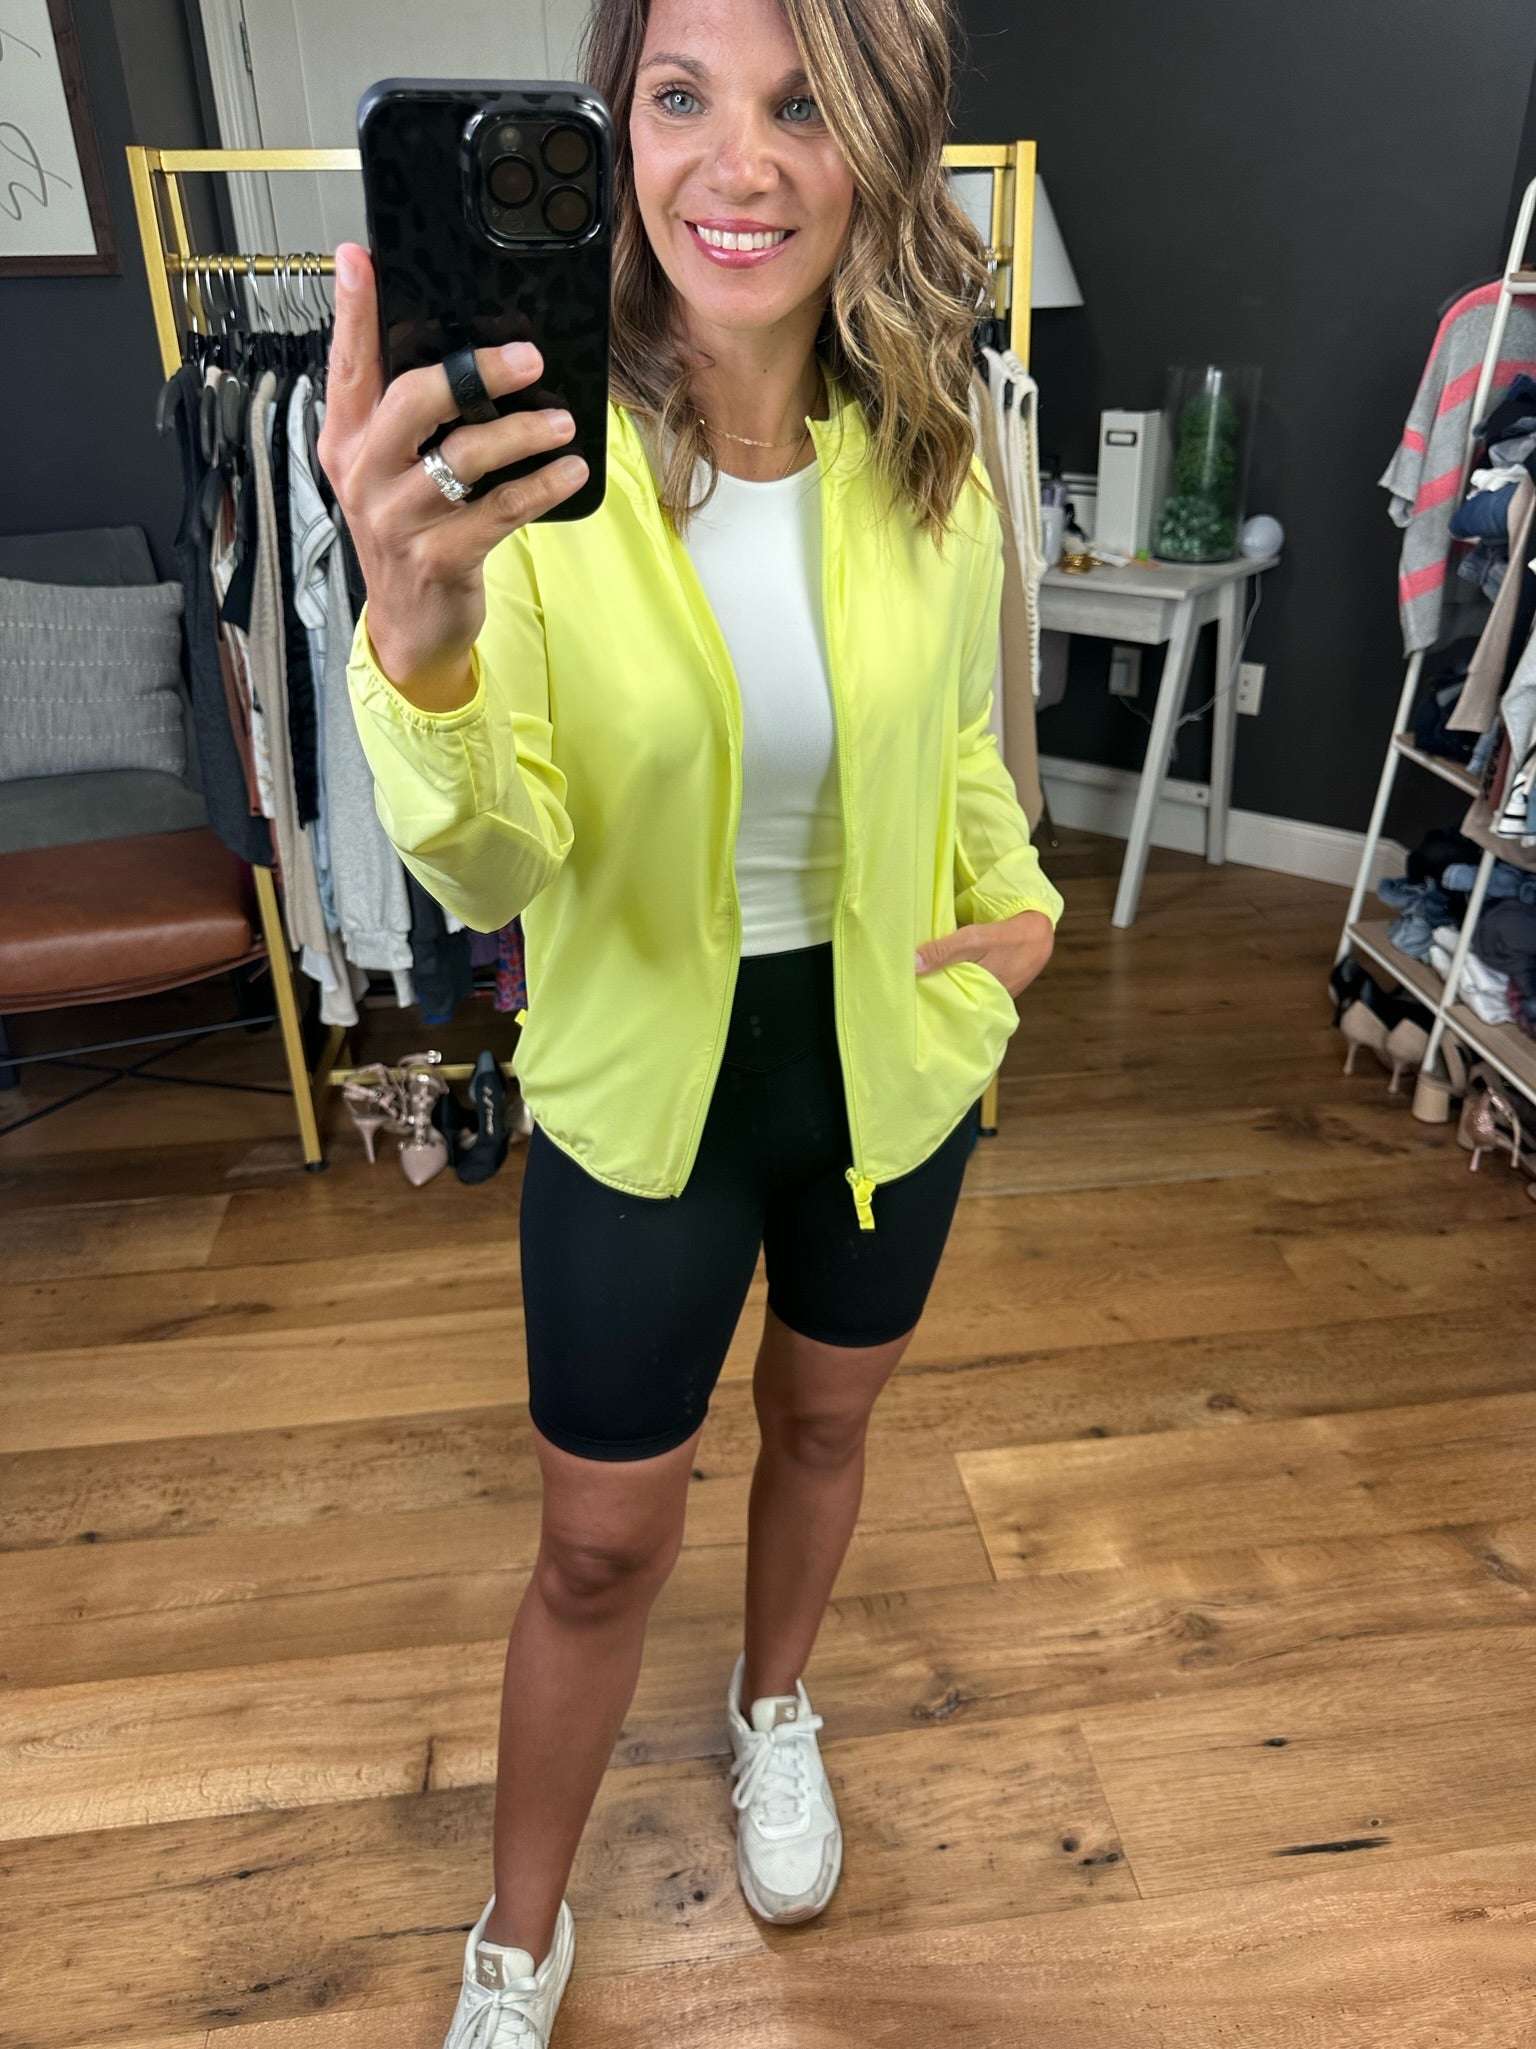 Let's Move Hooded Full-Zip Jacket - Lime